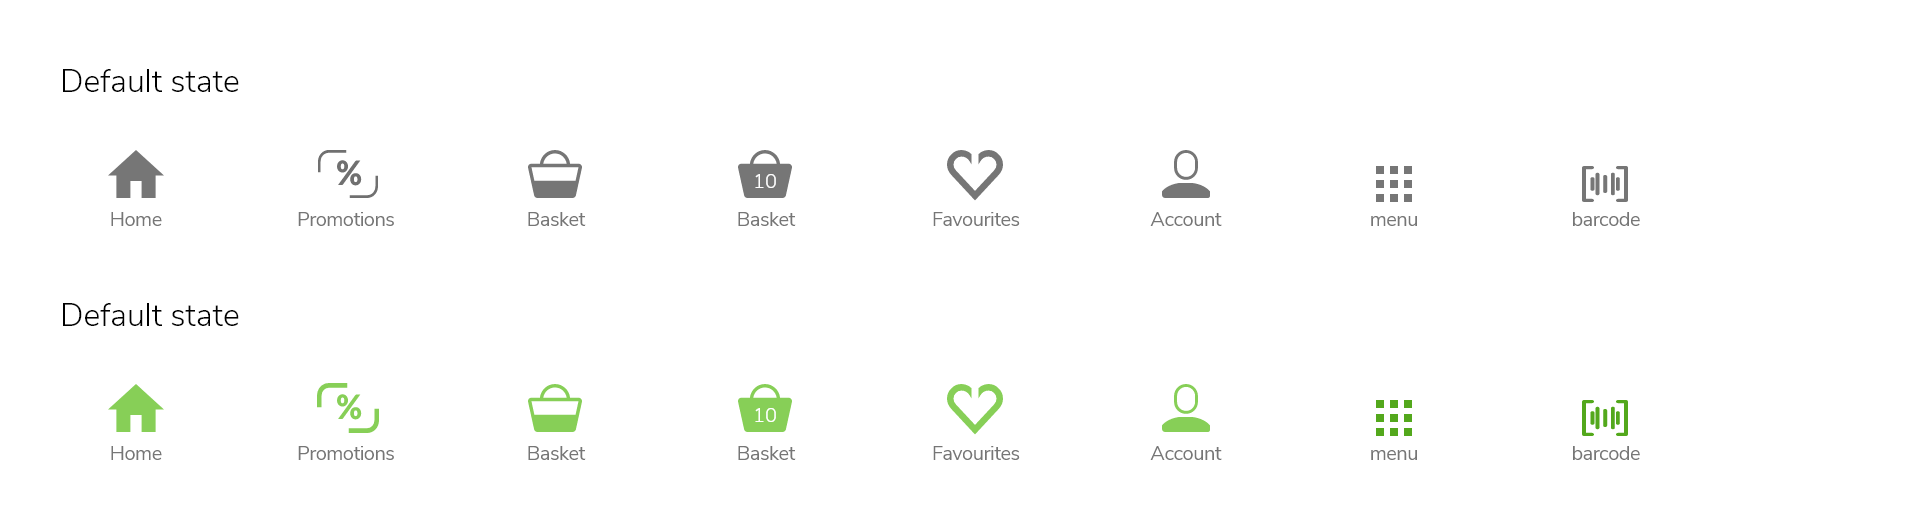 The icon library showing icons in their various interactive states